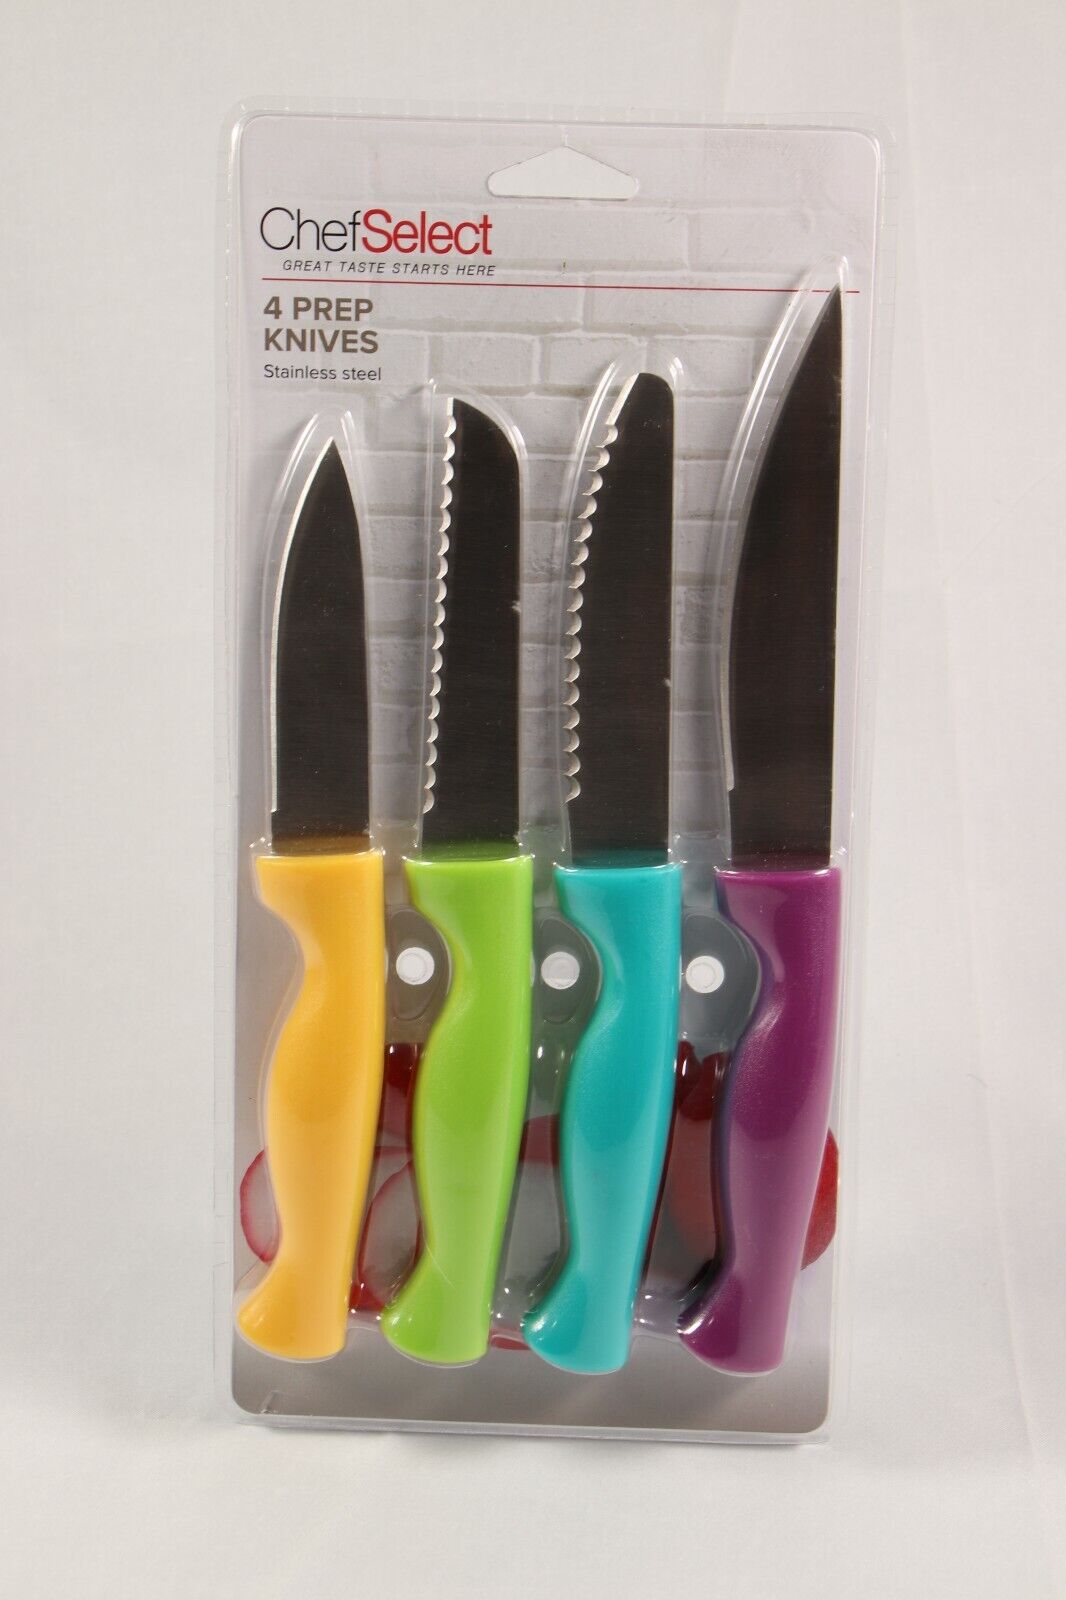 Chef Select Set of 4 Prep Knives Stainless Steel, Dishwasher Safe